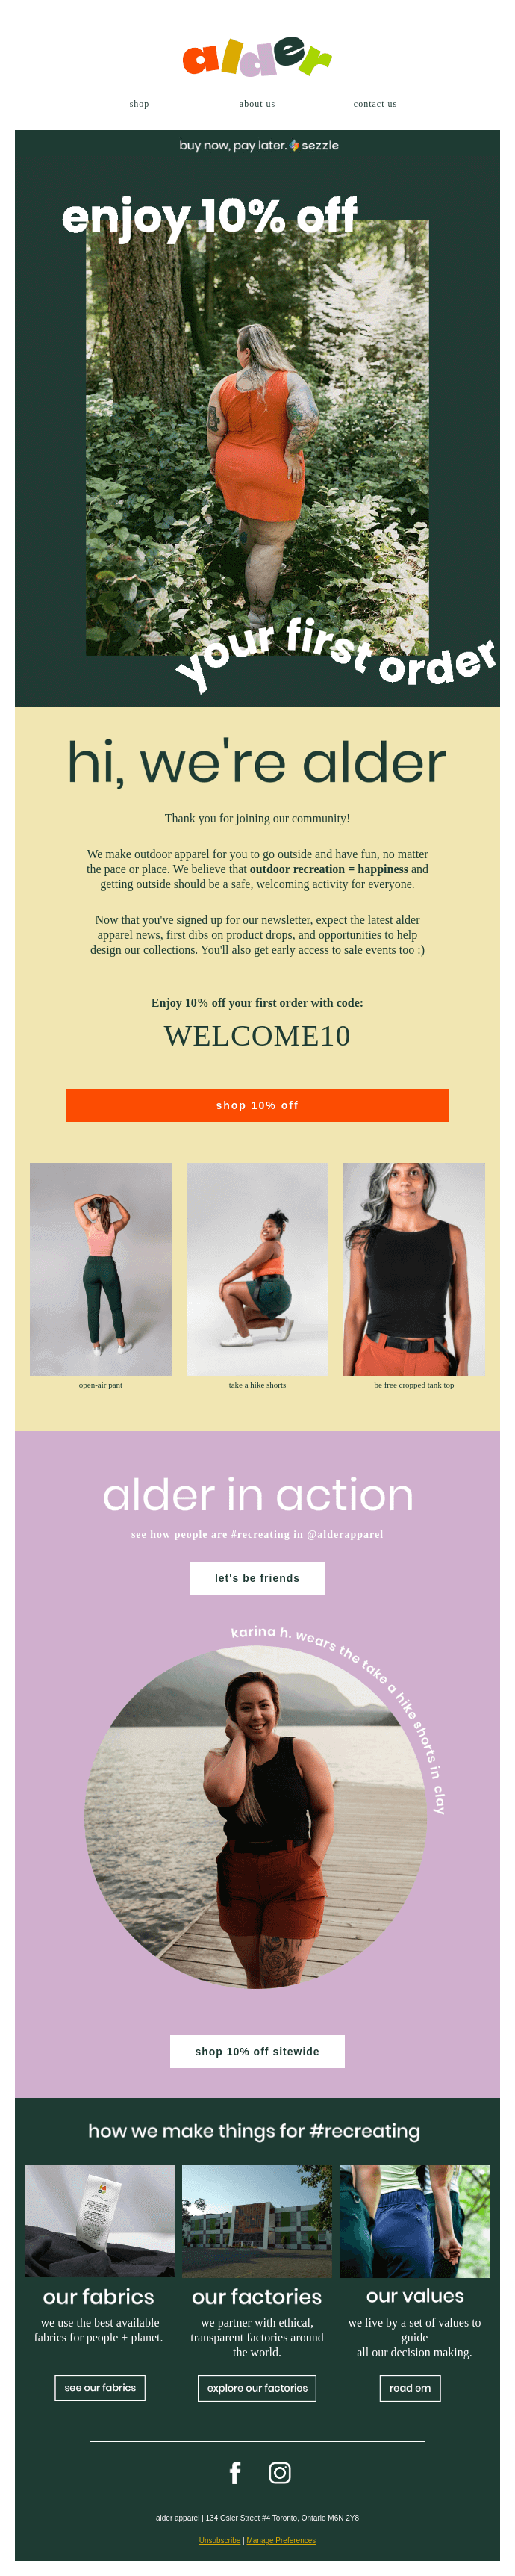 Personalized Welcome Flow Email - 1st Email